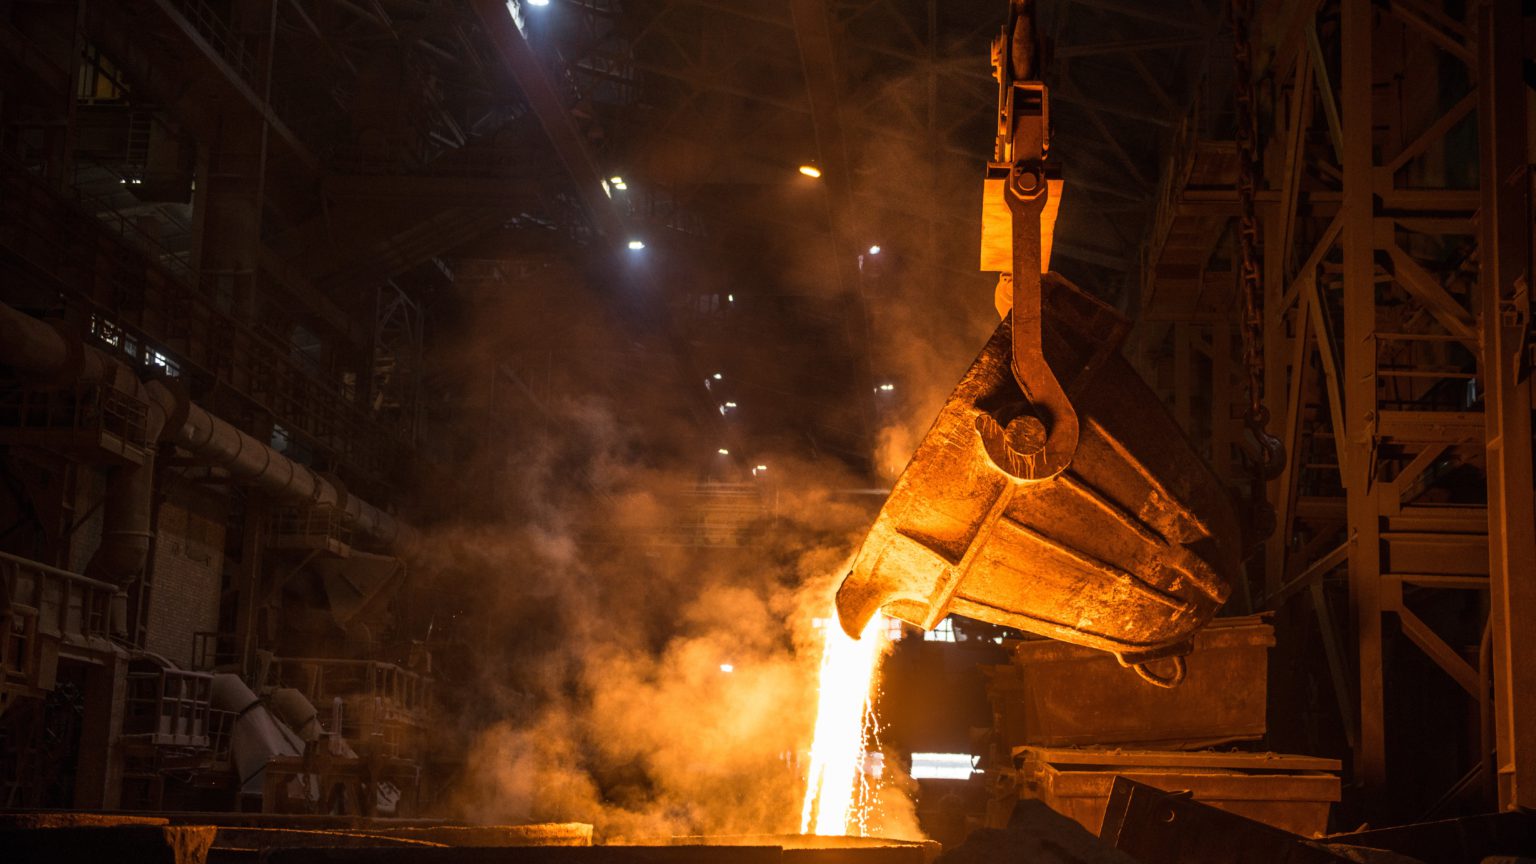 Iron ore price dives 7% on China’s lower steel output data